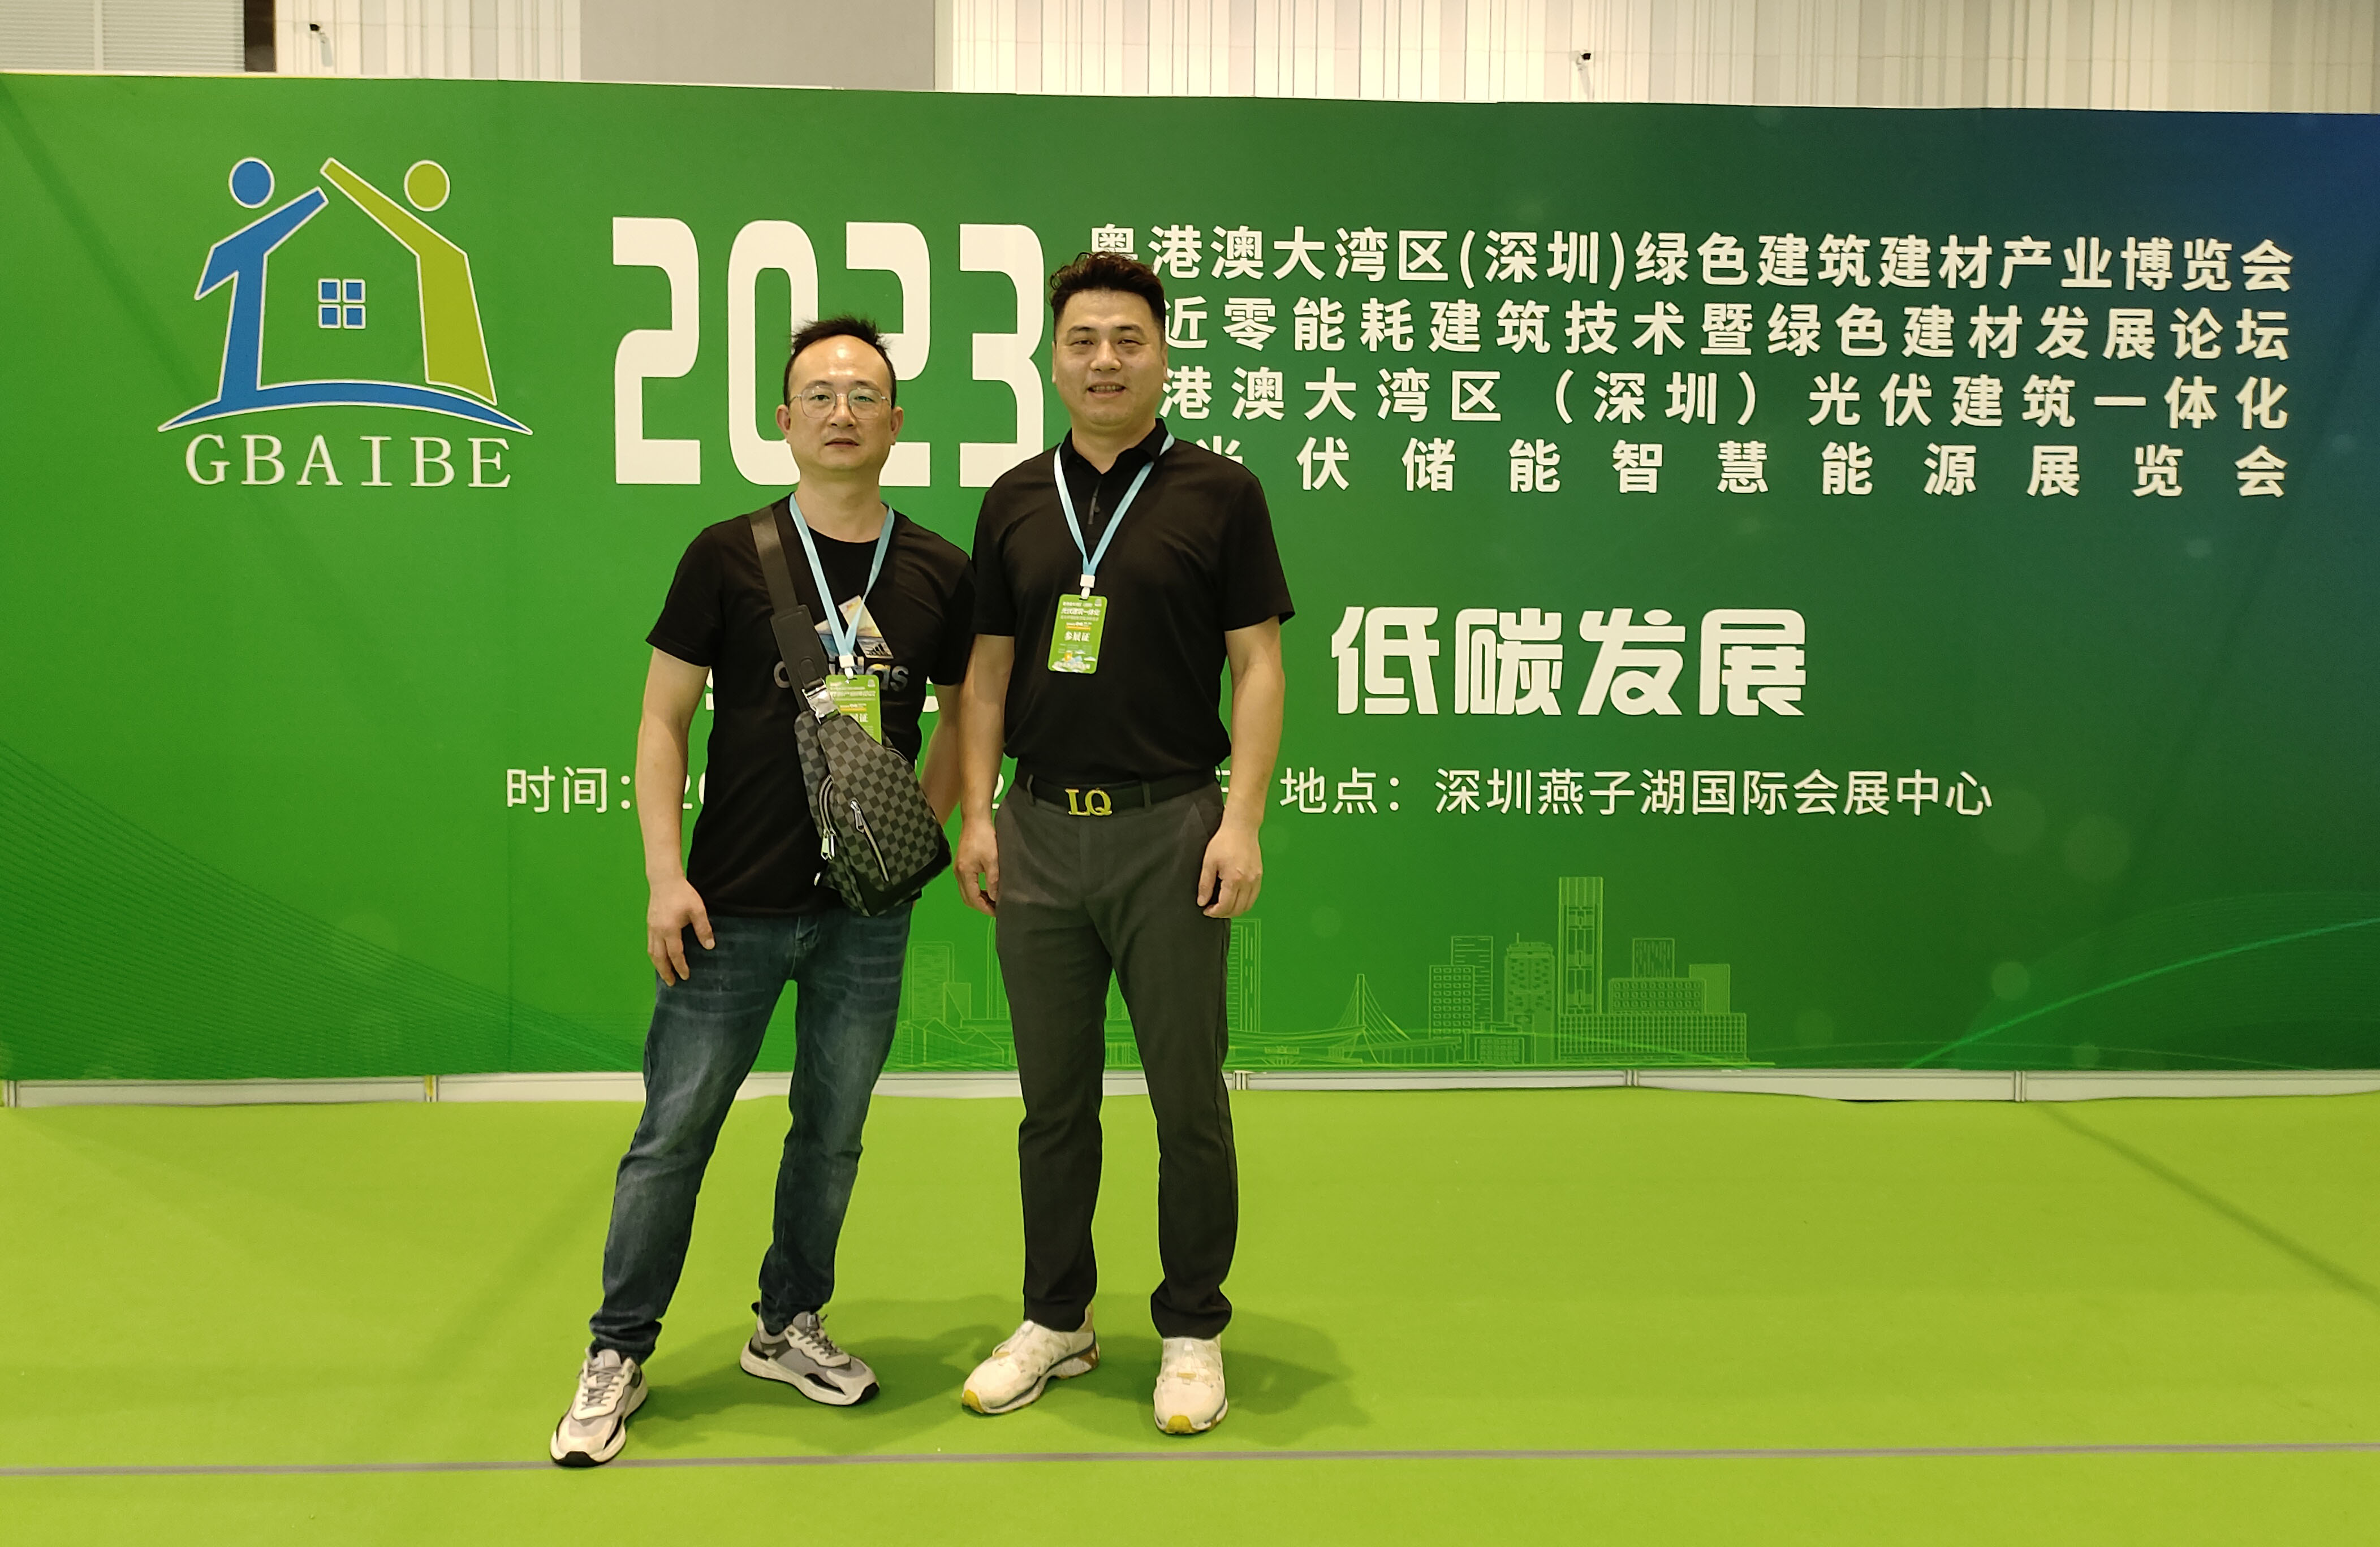 Longqi New Energy participated in the Photovoltaic Building Inte0gration and Photovoltaic Energy Storage Smart Energy Exhibition